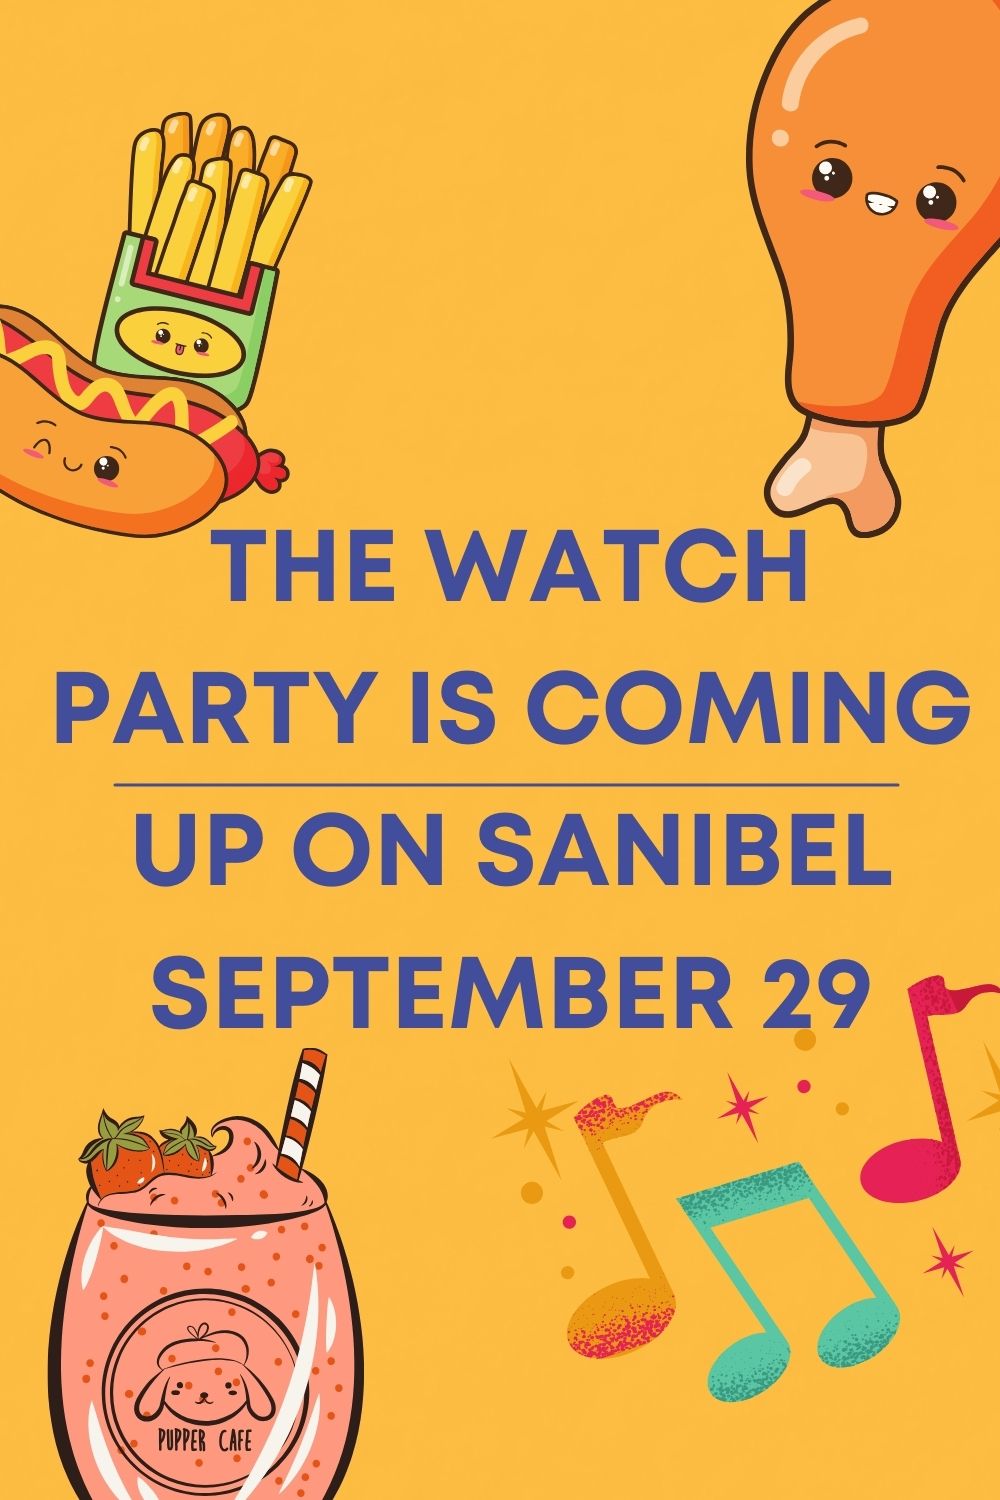 The Watch Party is Coming Up on Sanibel September 29